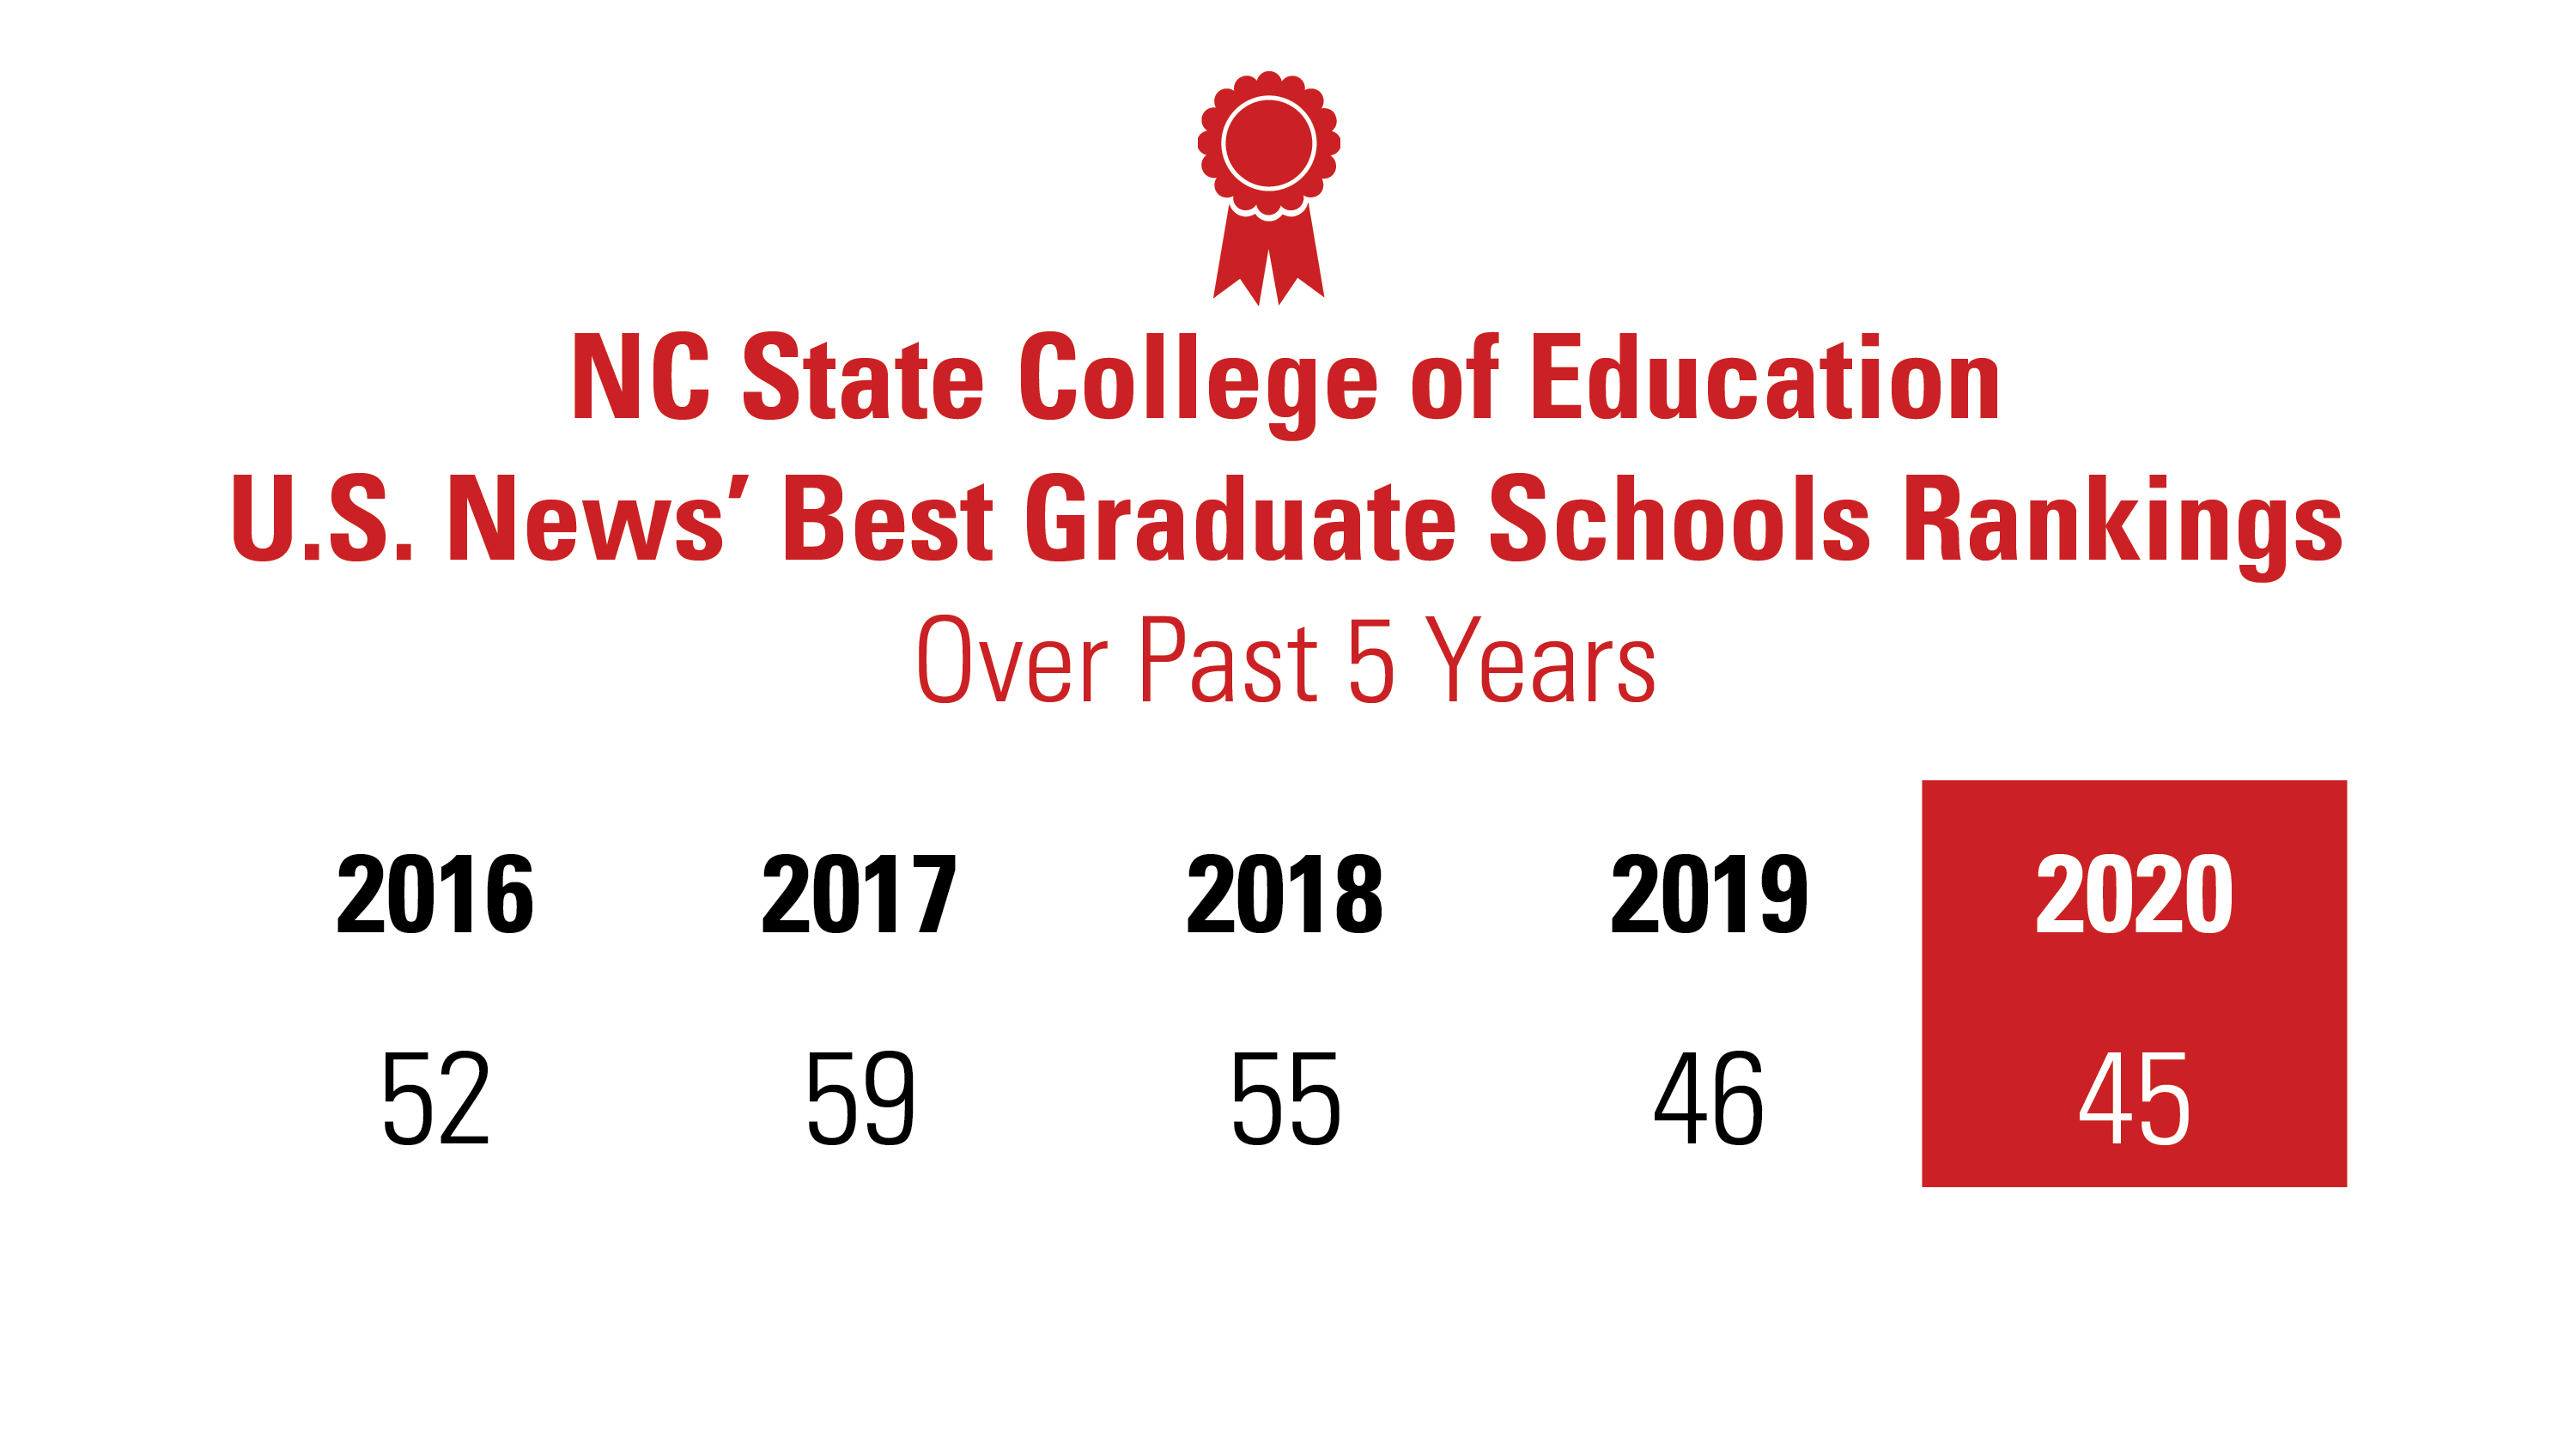 The College of Education has risen in the US News' rankings over the past three years and is up 14 spots since 2017.